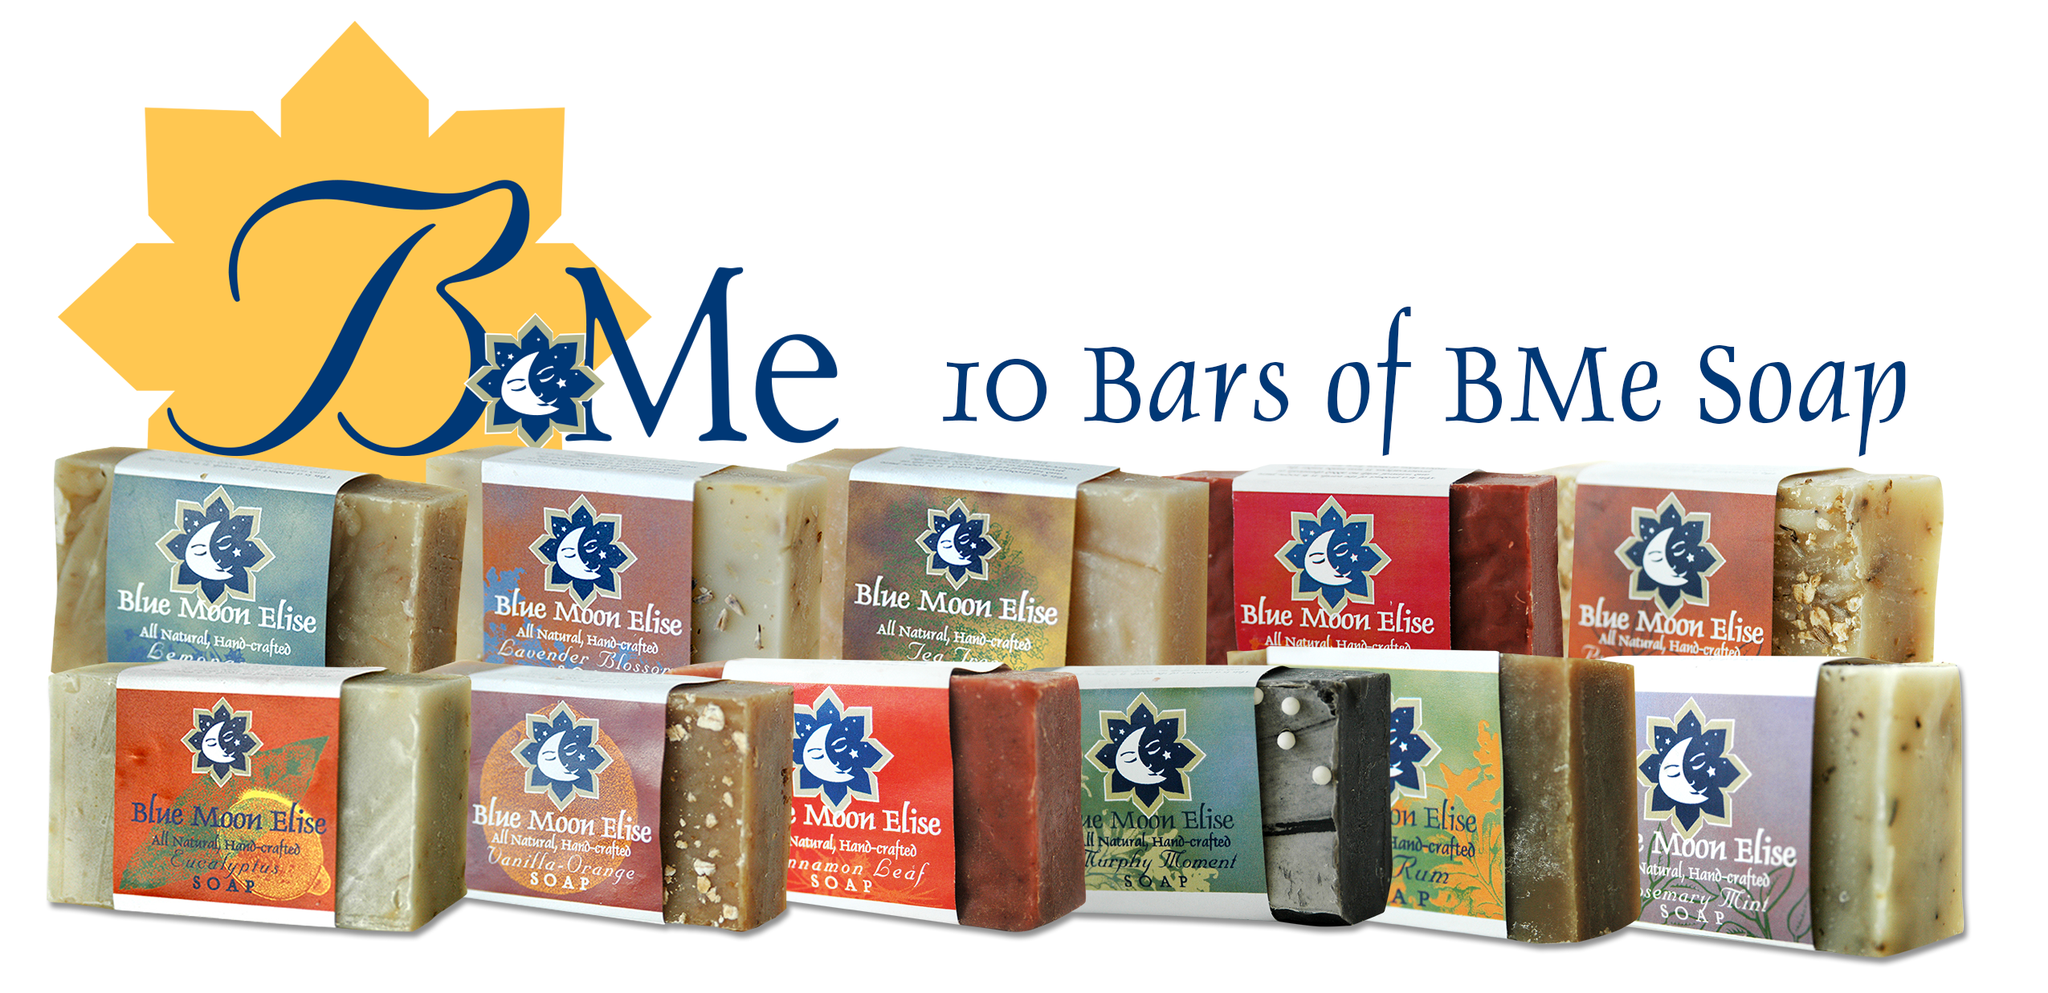 10 Bars of BMe Soap- click here to find out which soaps